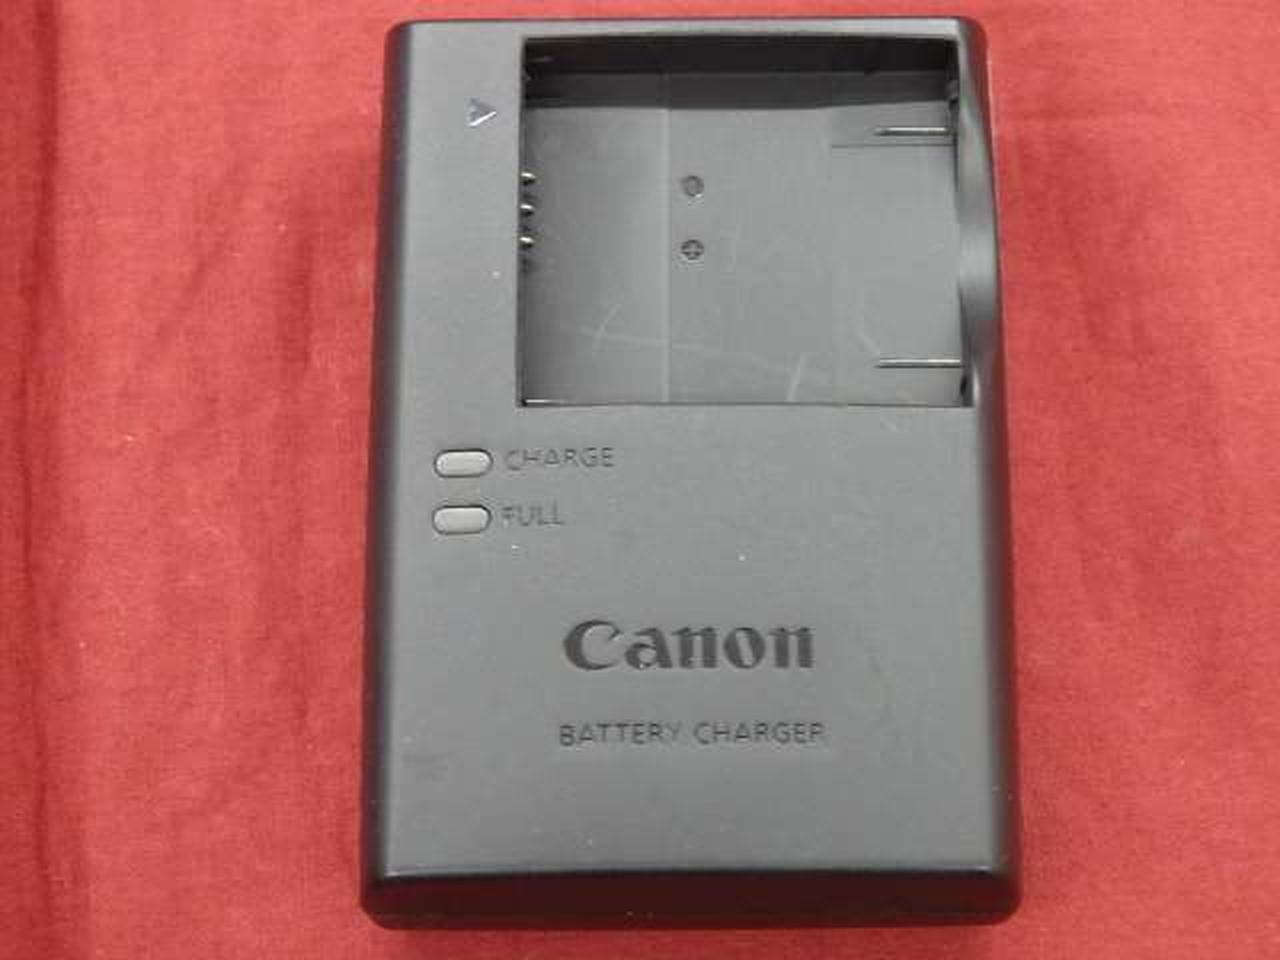 Canon Digital camera Model number: IXY200  Used in Japan